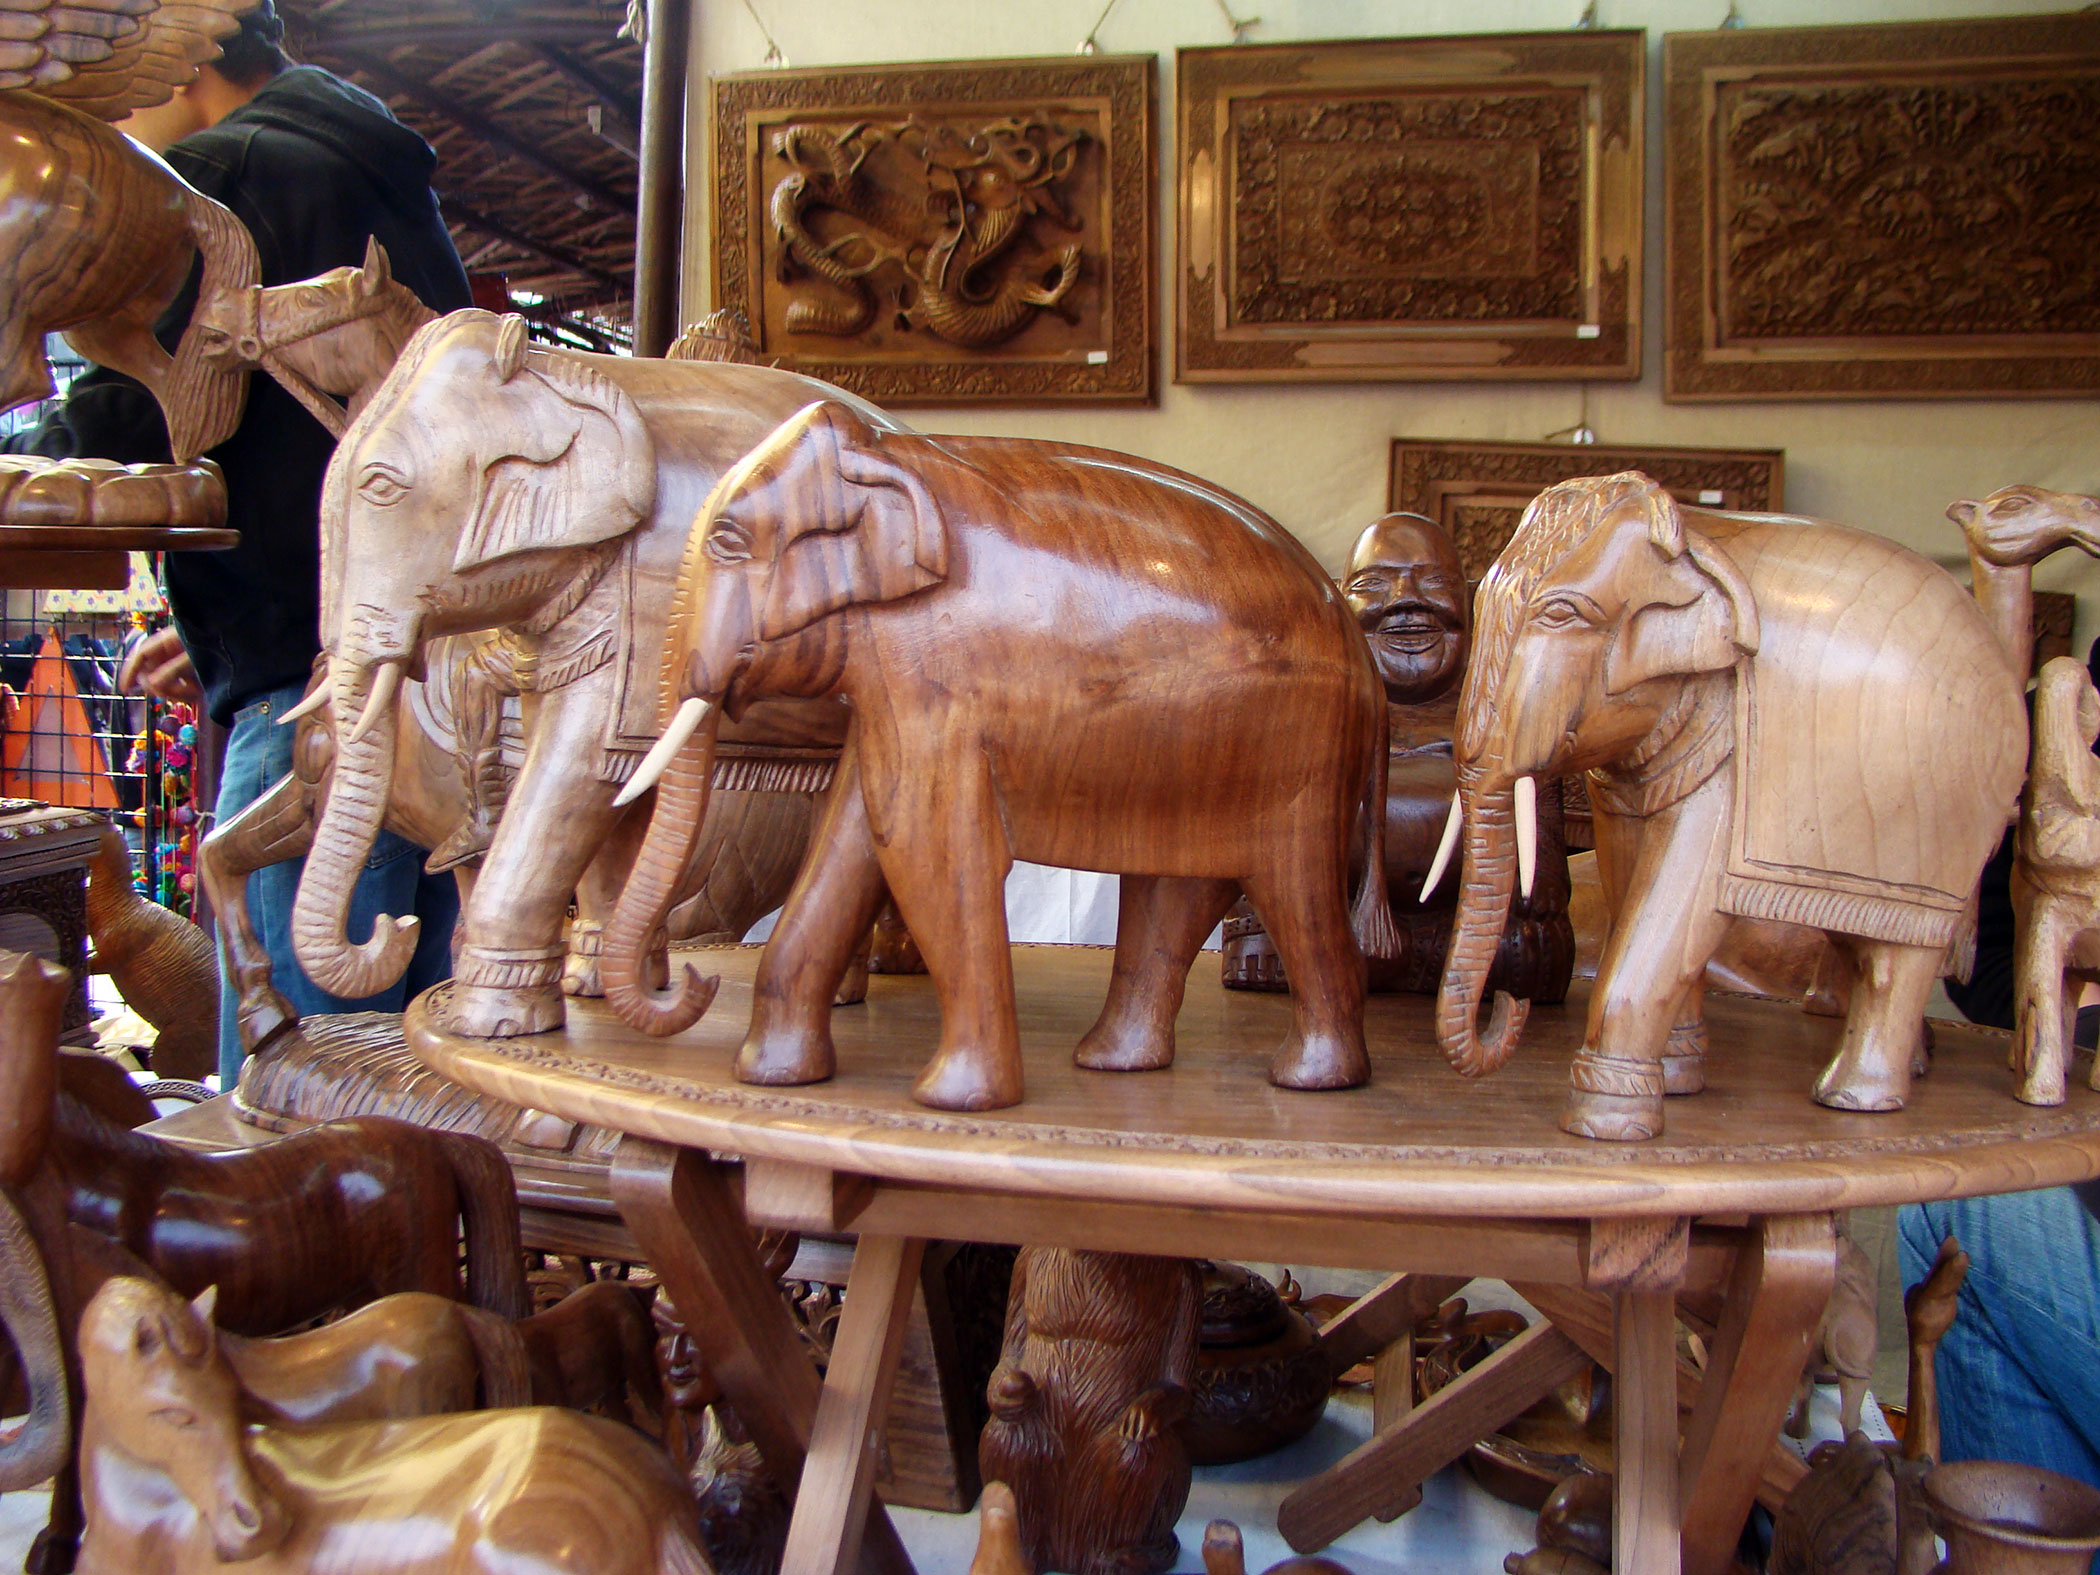 walnut wood carving and craft, animal figures